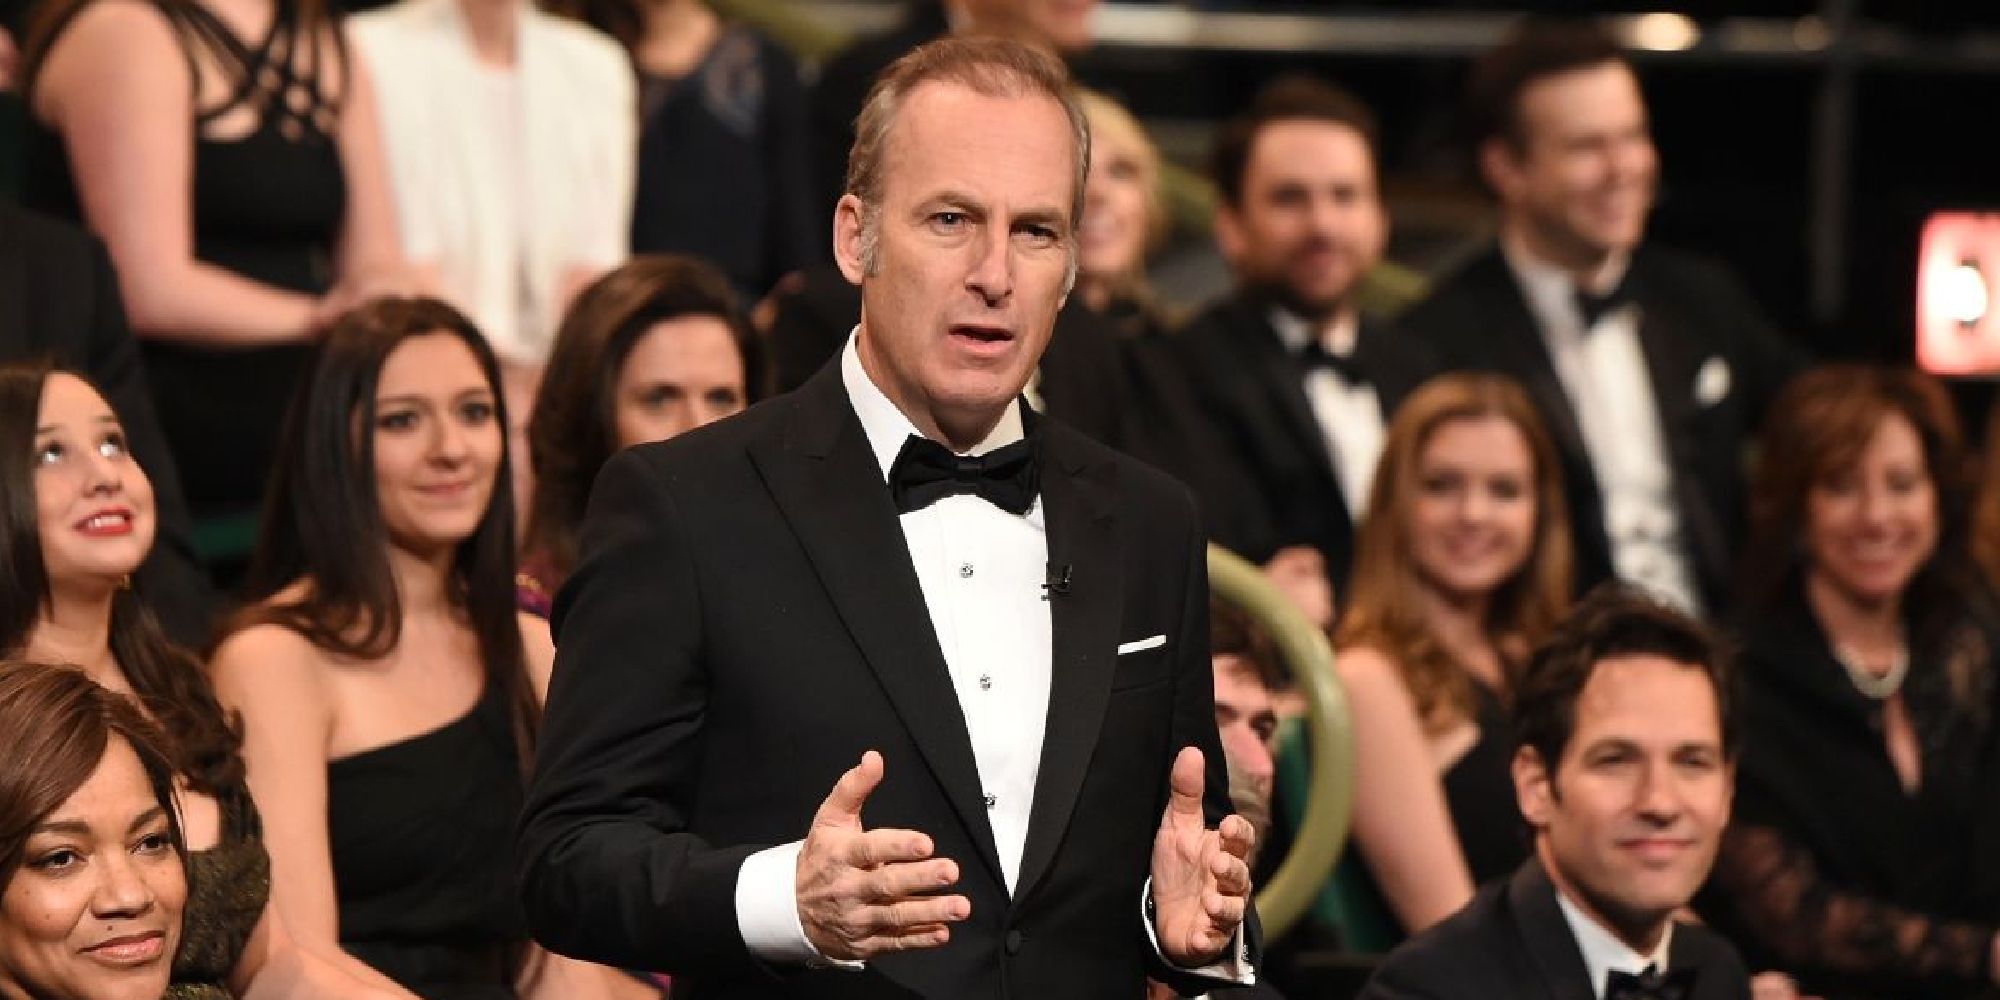 Bob Odenkirk in a tux appearing in the audience during the SNL 40th Anniversary Special